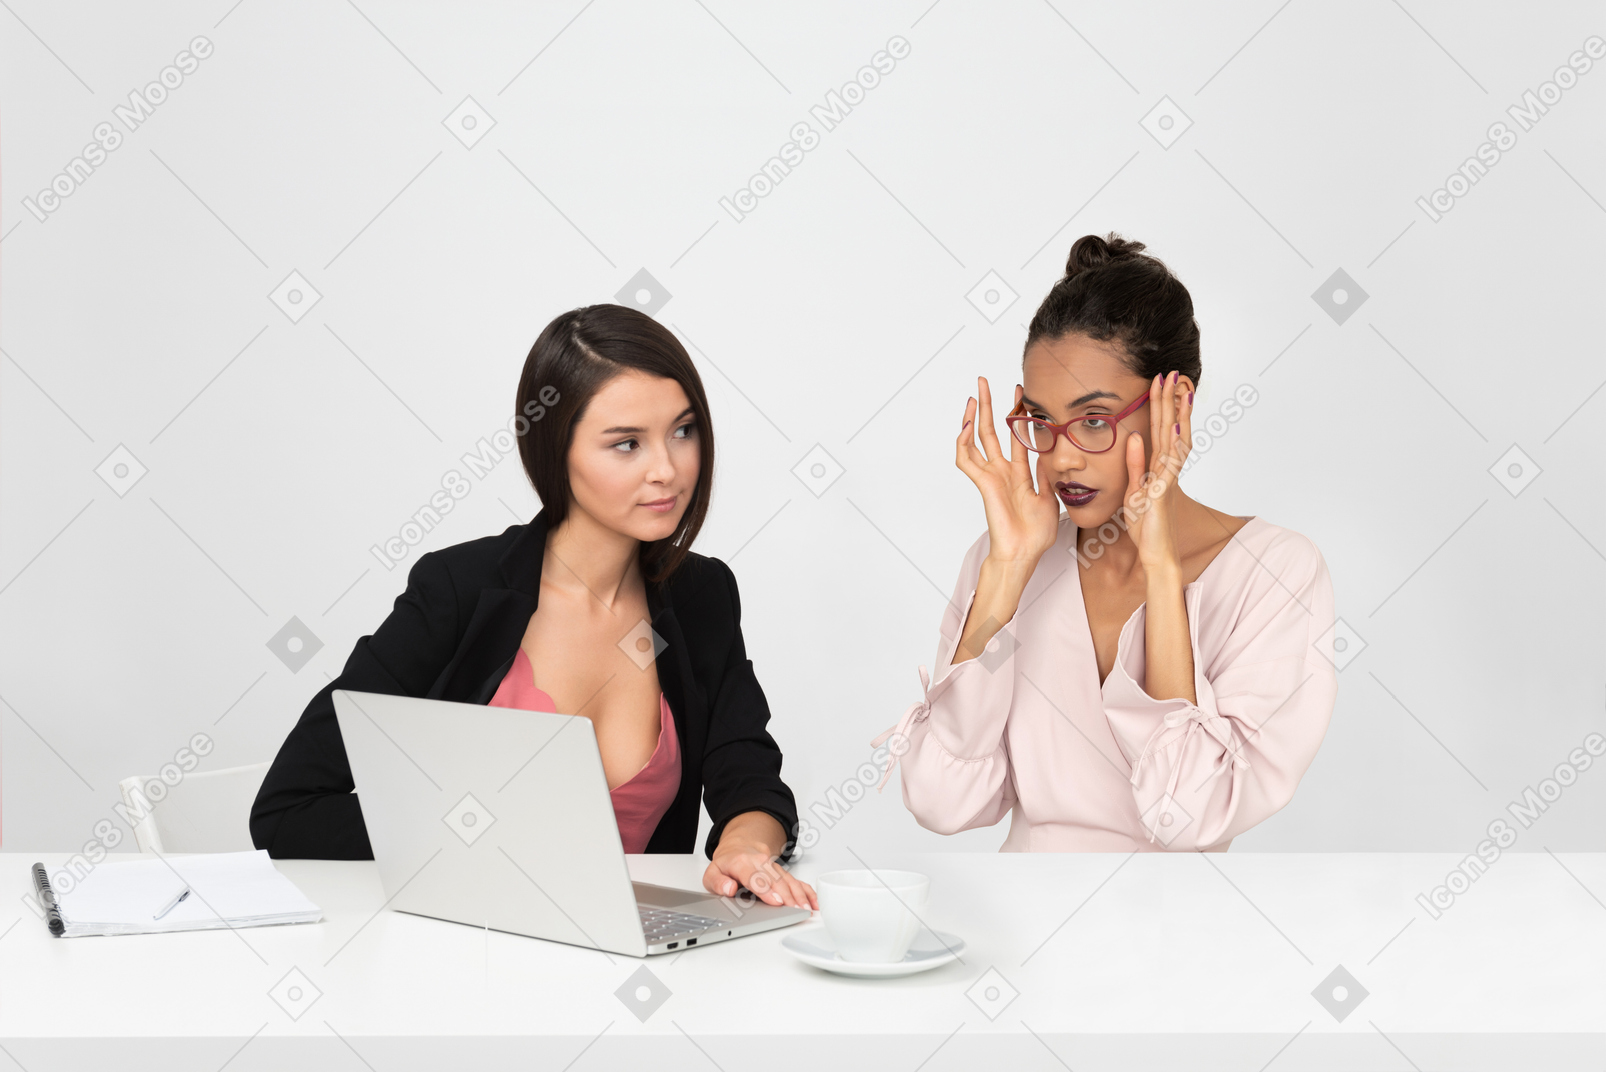 Attractive woman showing something shocking to her colleague